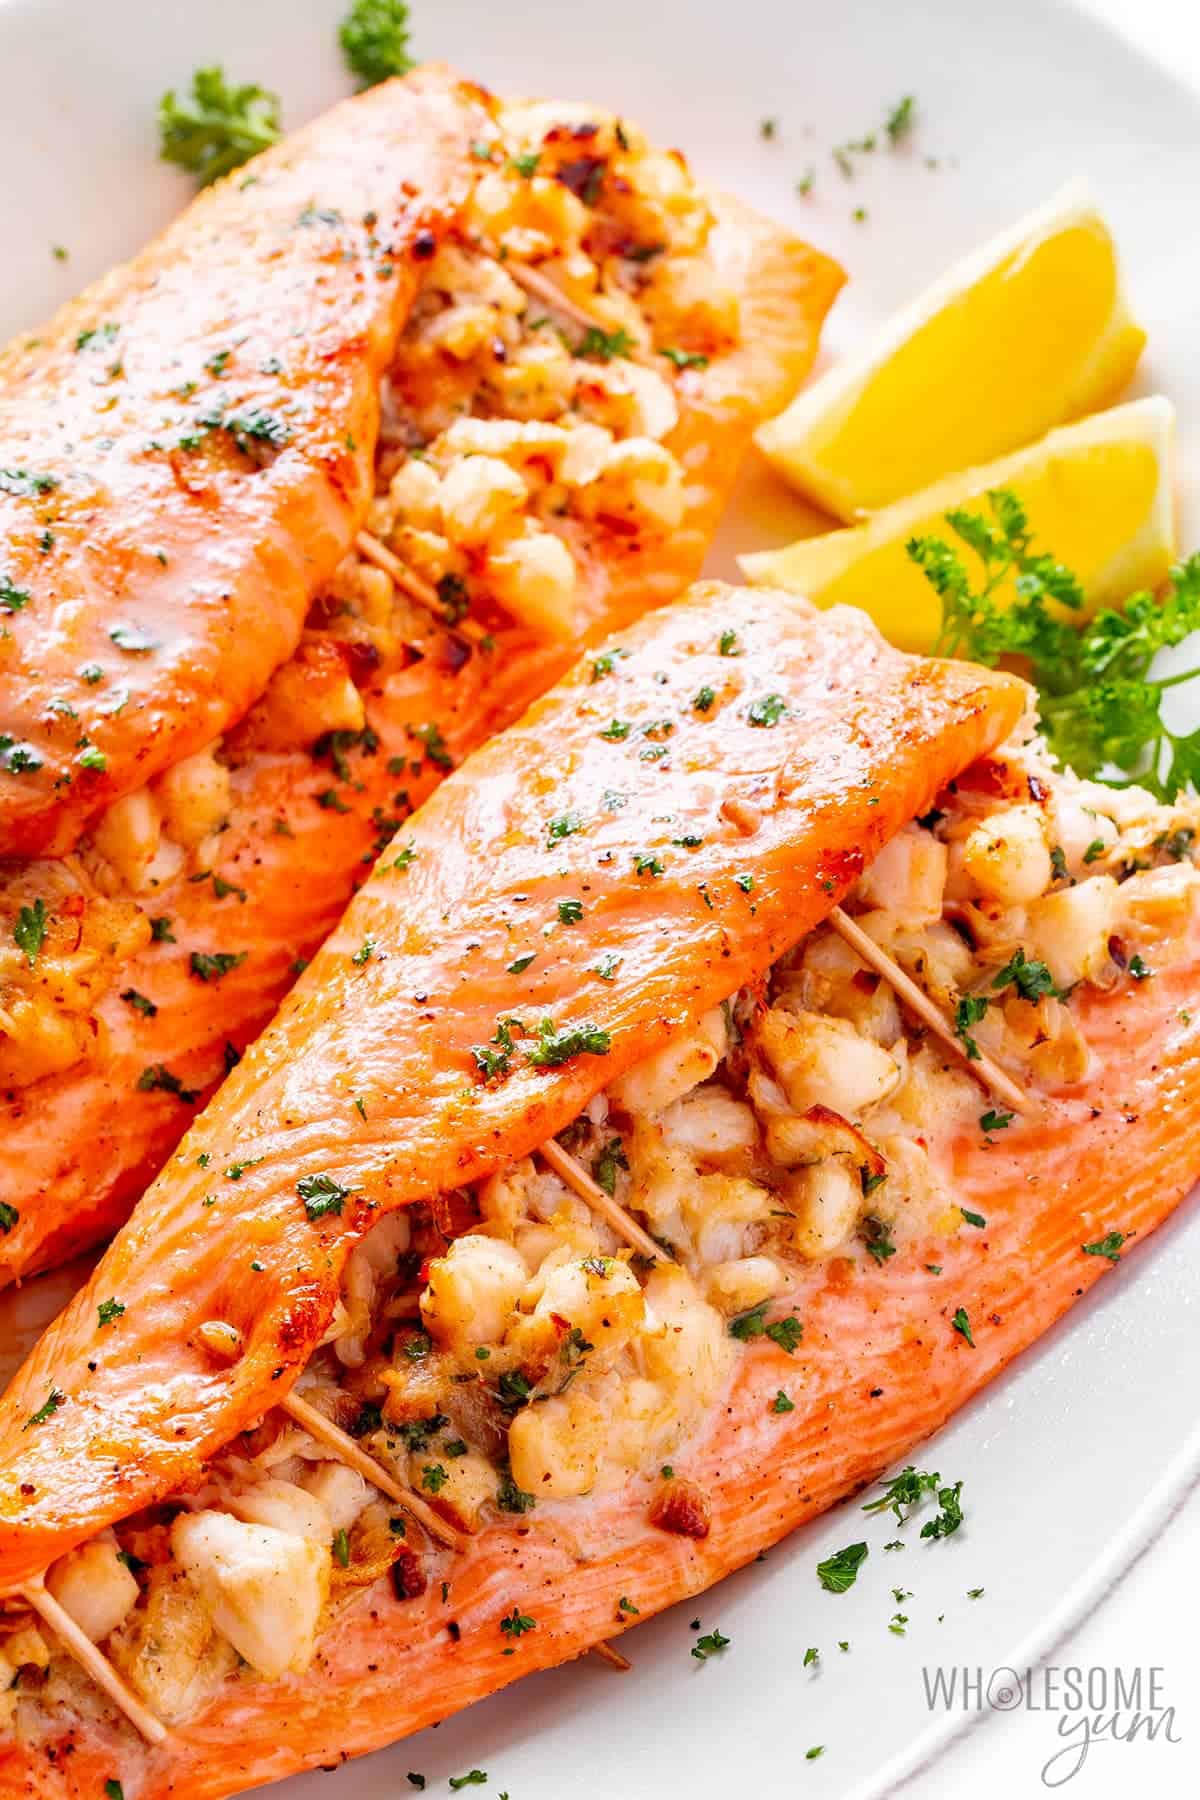 Crab stuffed salmon recipe on a platter with lemon wedges.